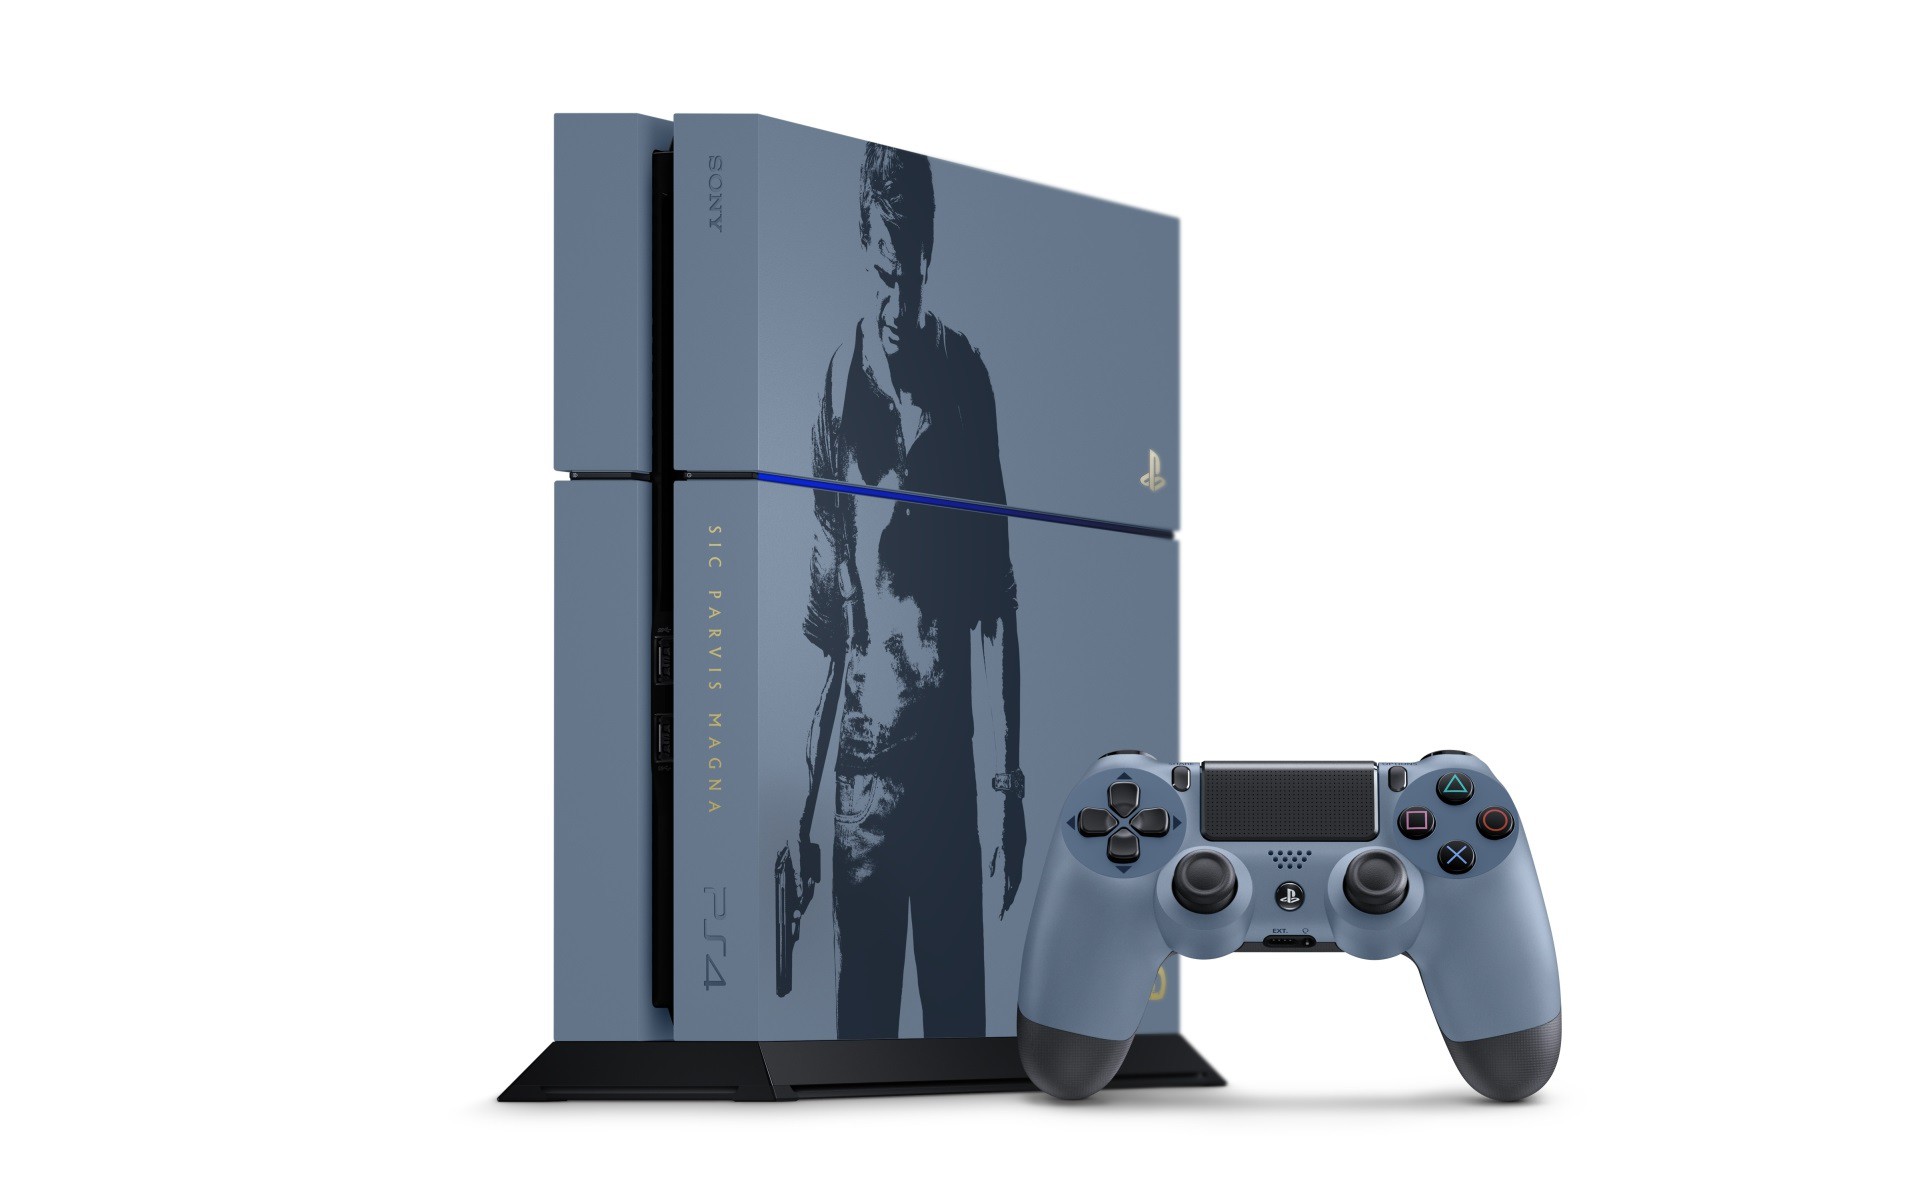 Hots ps4. Ps4 Uncharted 4 Limited. Ps4 Uncharted 4 Limited Edition. Uncharted 4 ps4. PLAYSTATION 4 Uncharted Edition.